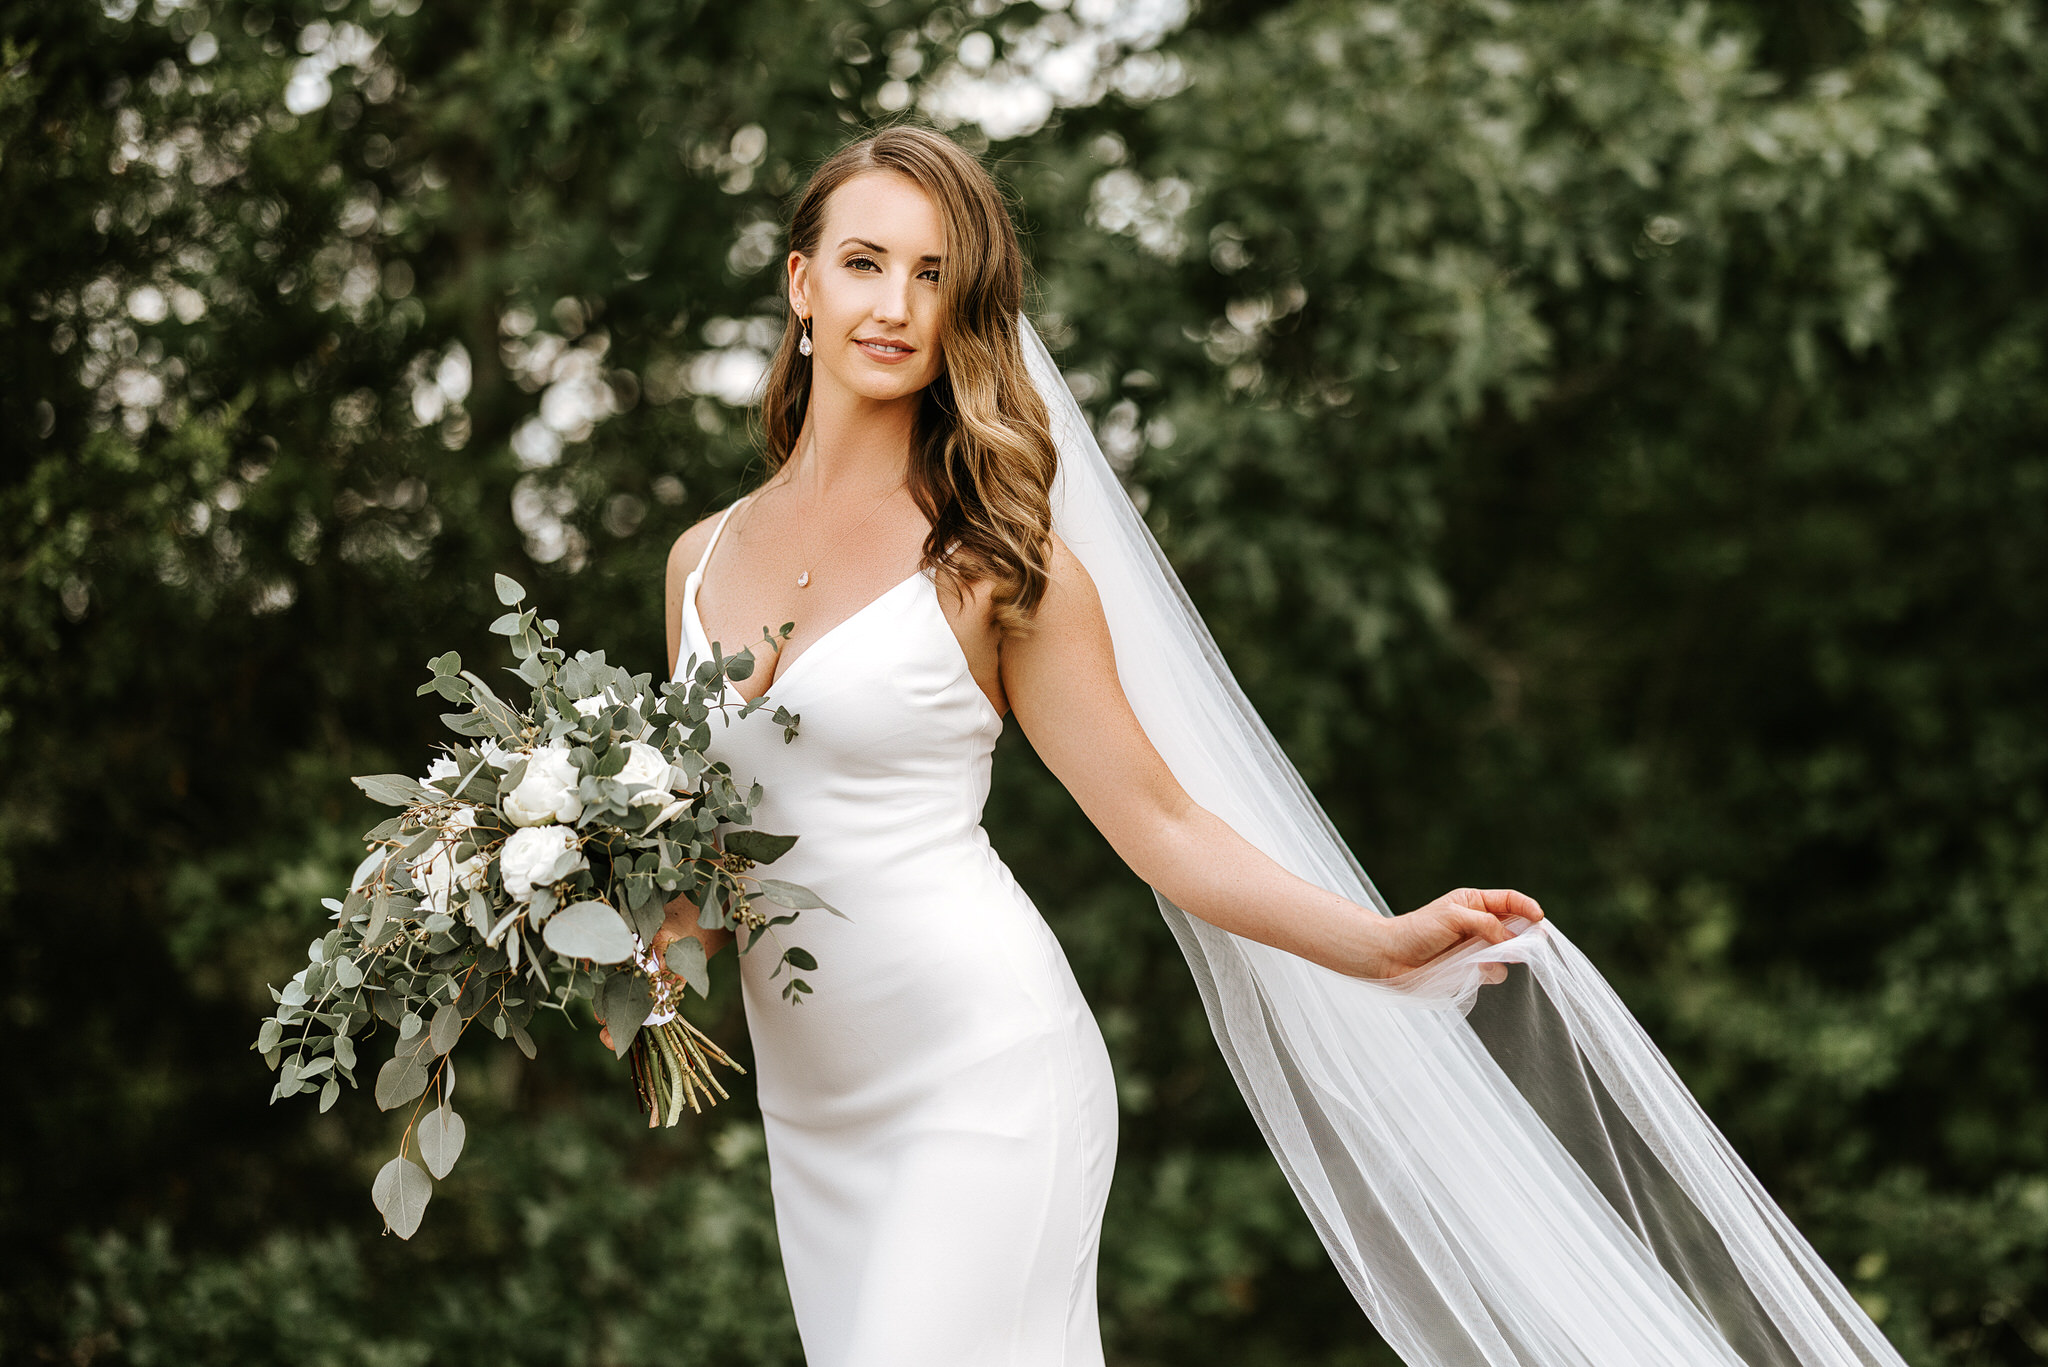 Bridal dramatic portrait standing by trees at stone crest venue